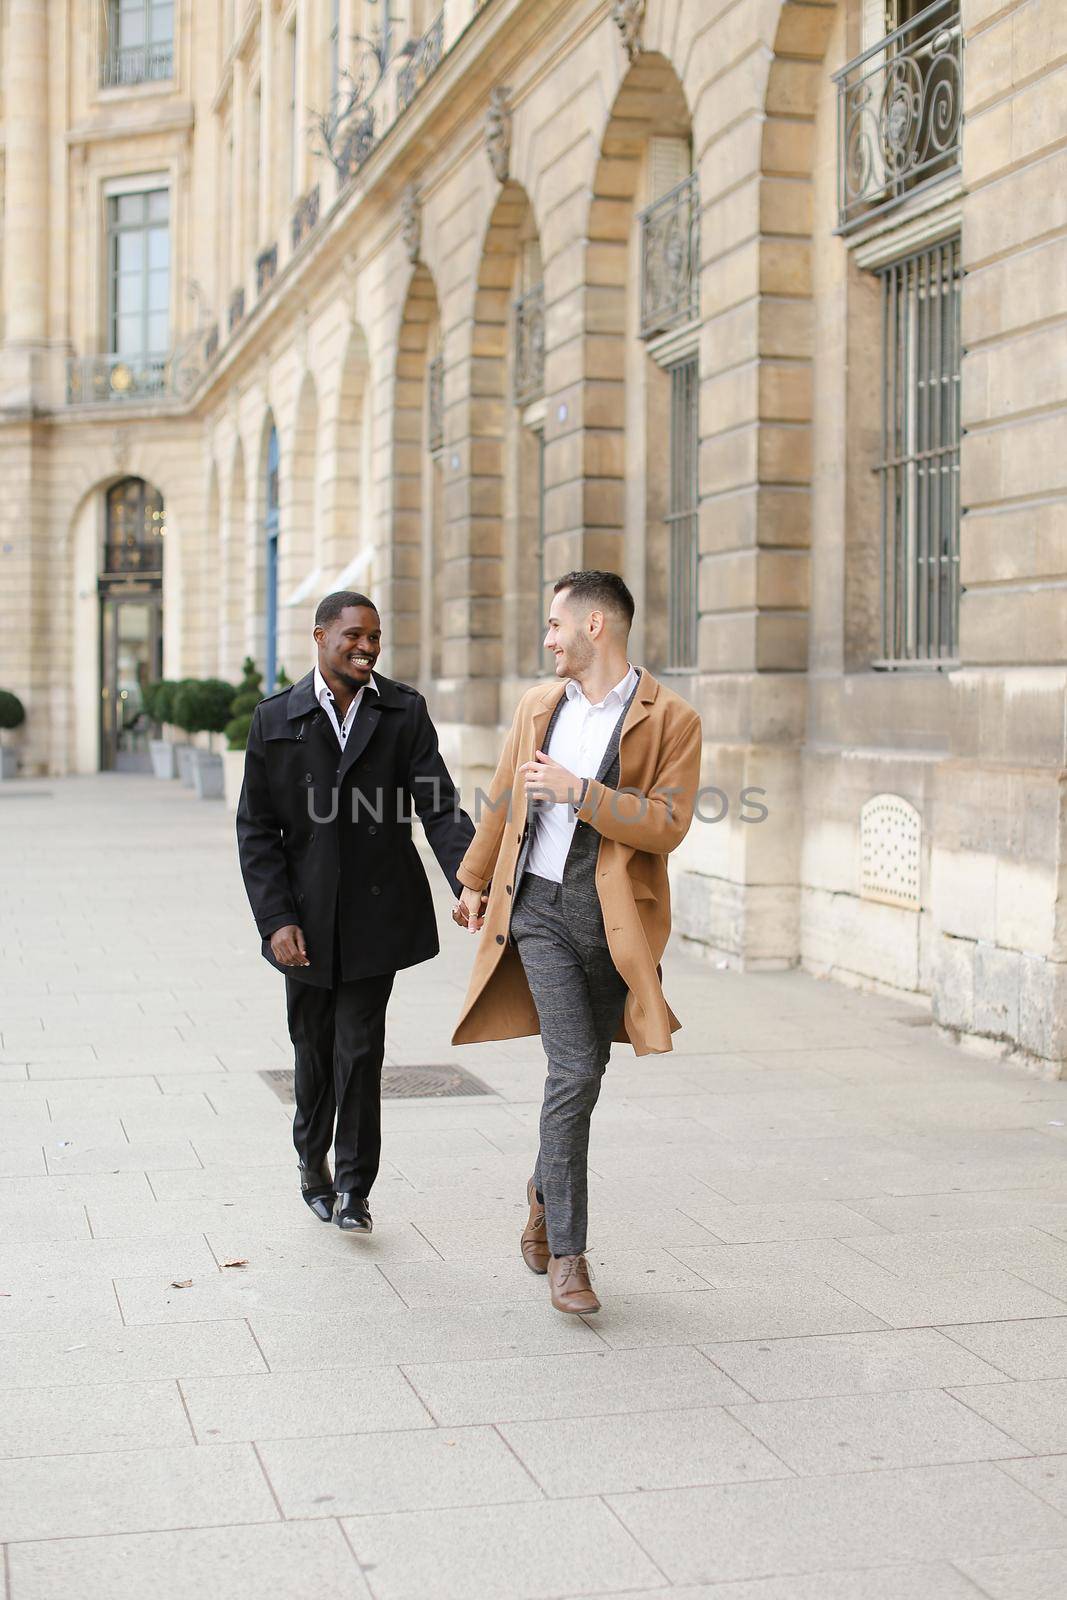 Caucasian man running with afroamerican male person and holding hands in city. Concept of happy gays and strolling.